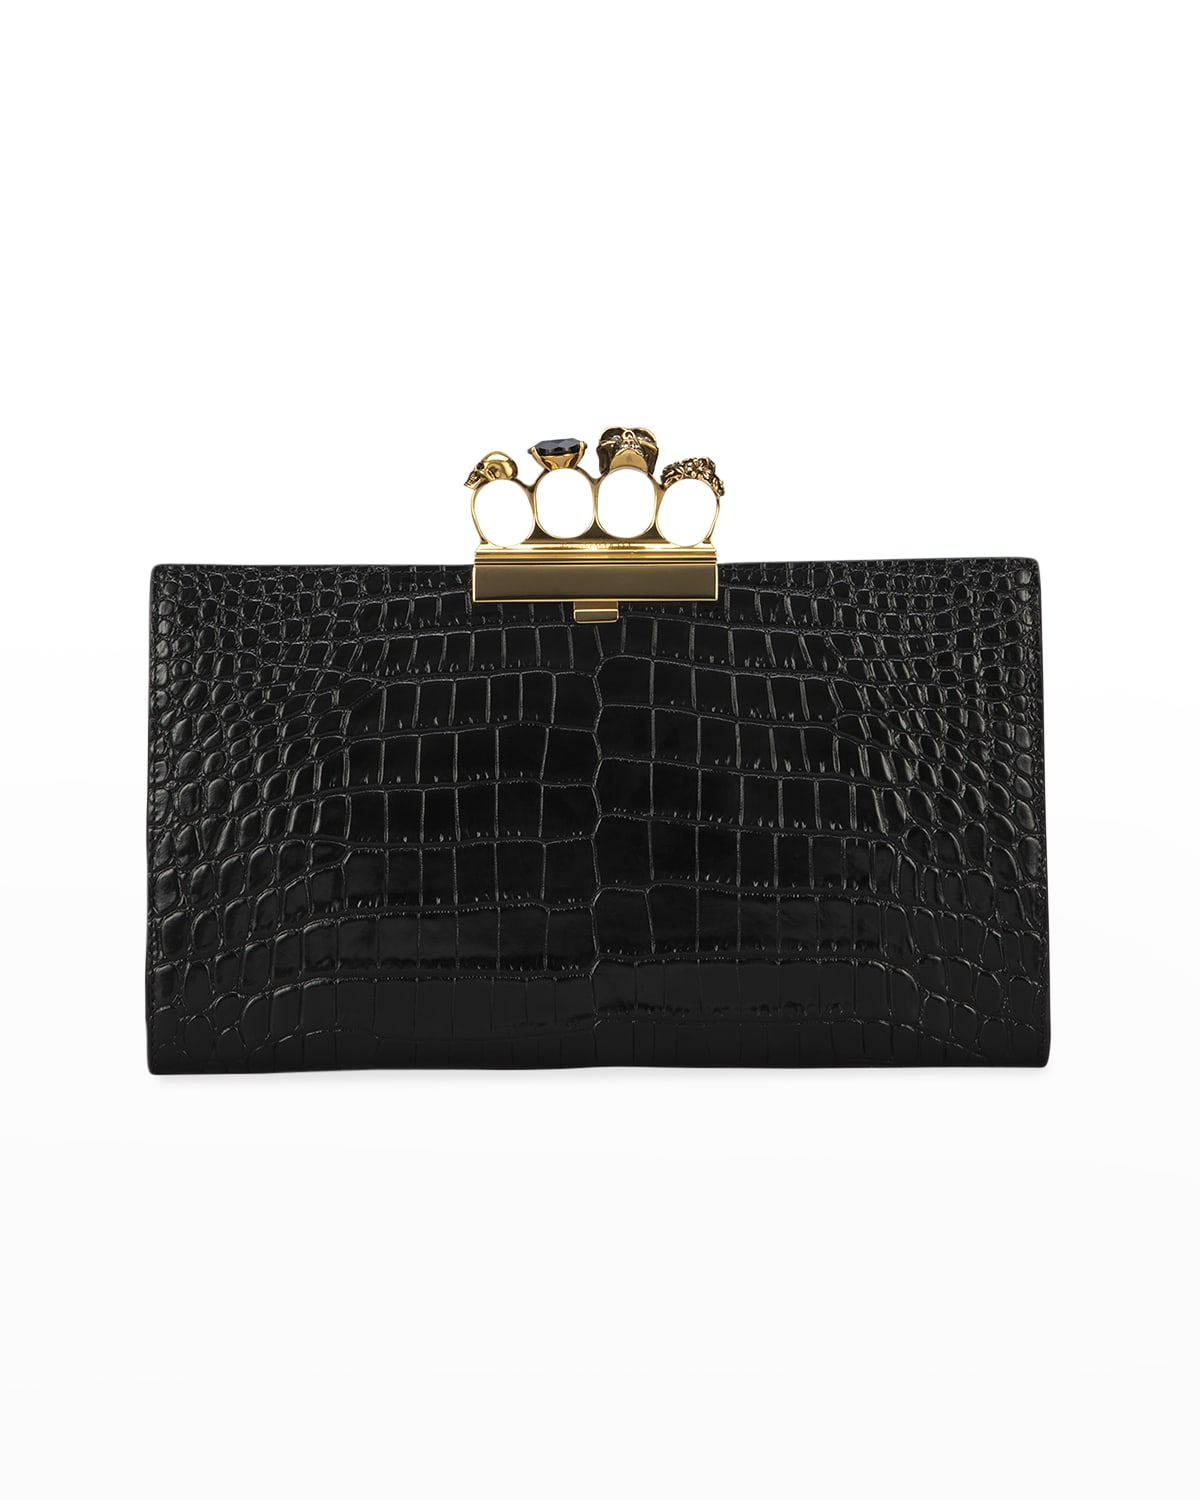 Alexander McQueen Four-Ring Stamped Crocodile Clutch Bag